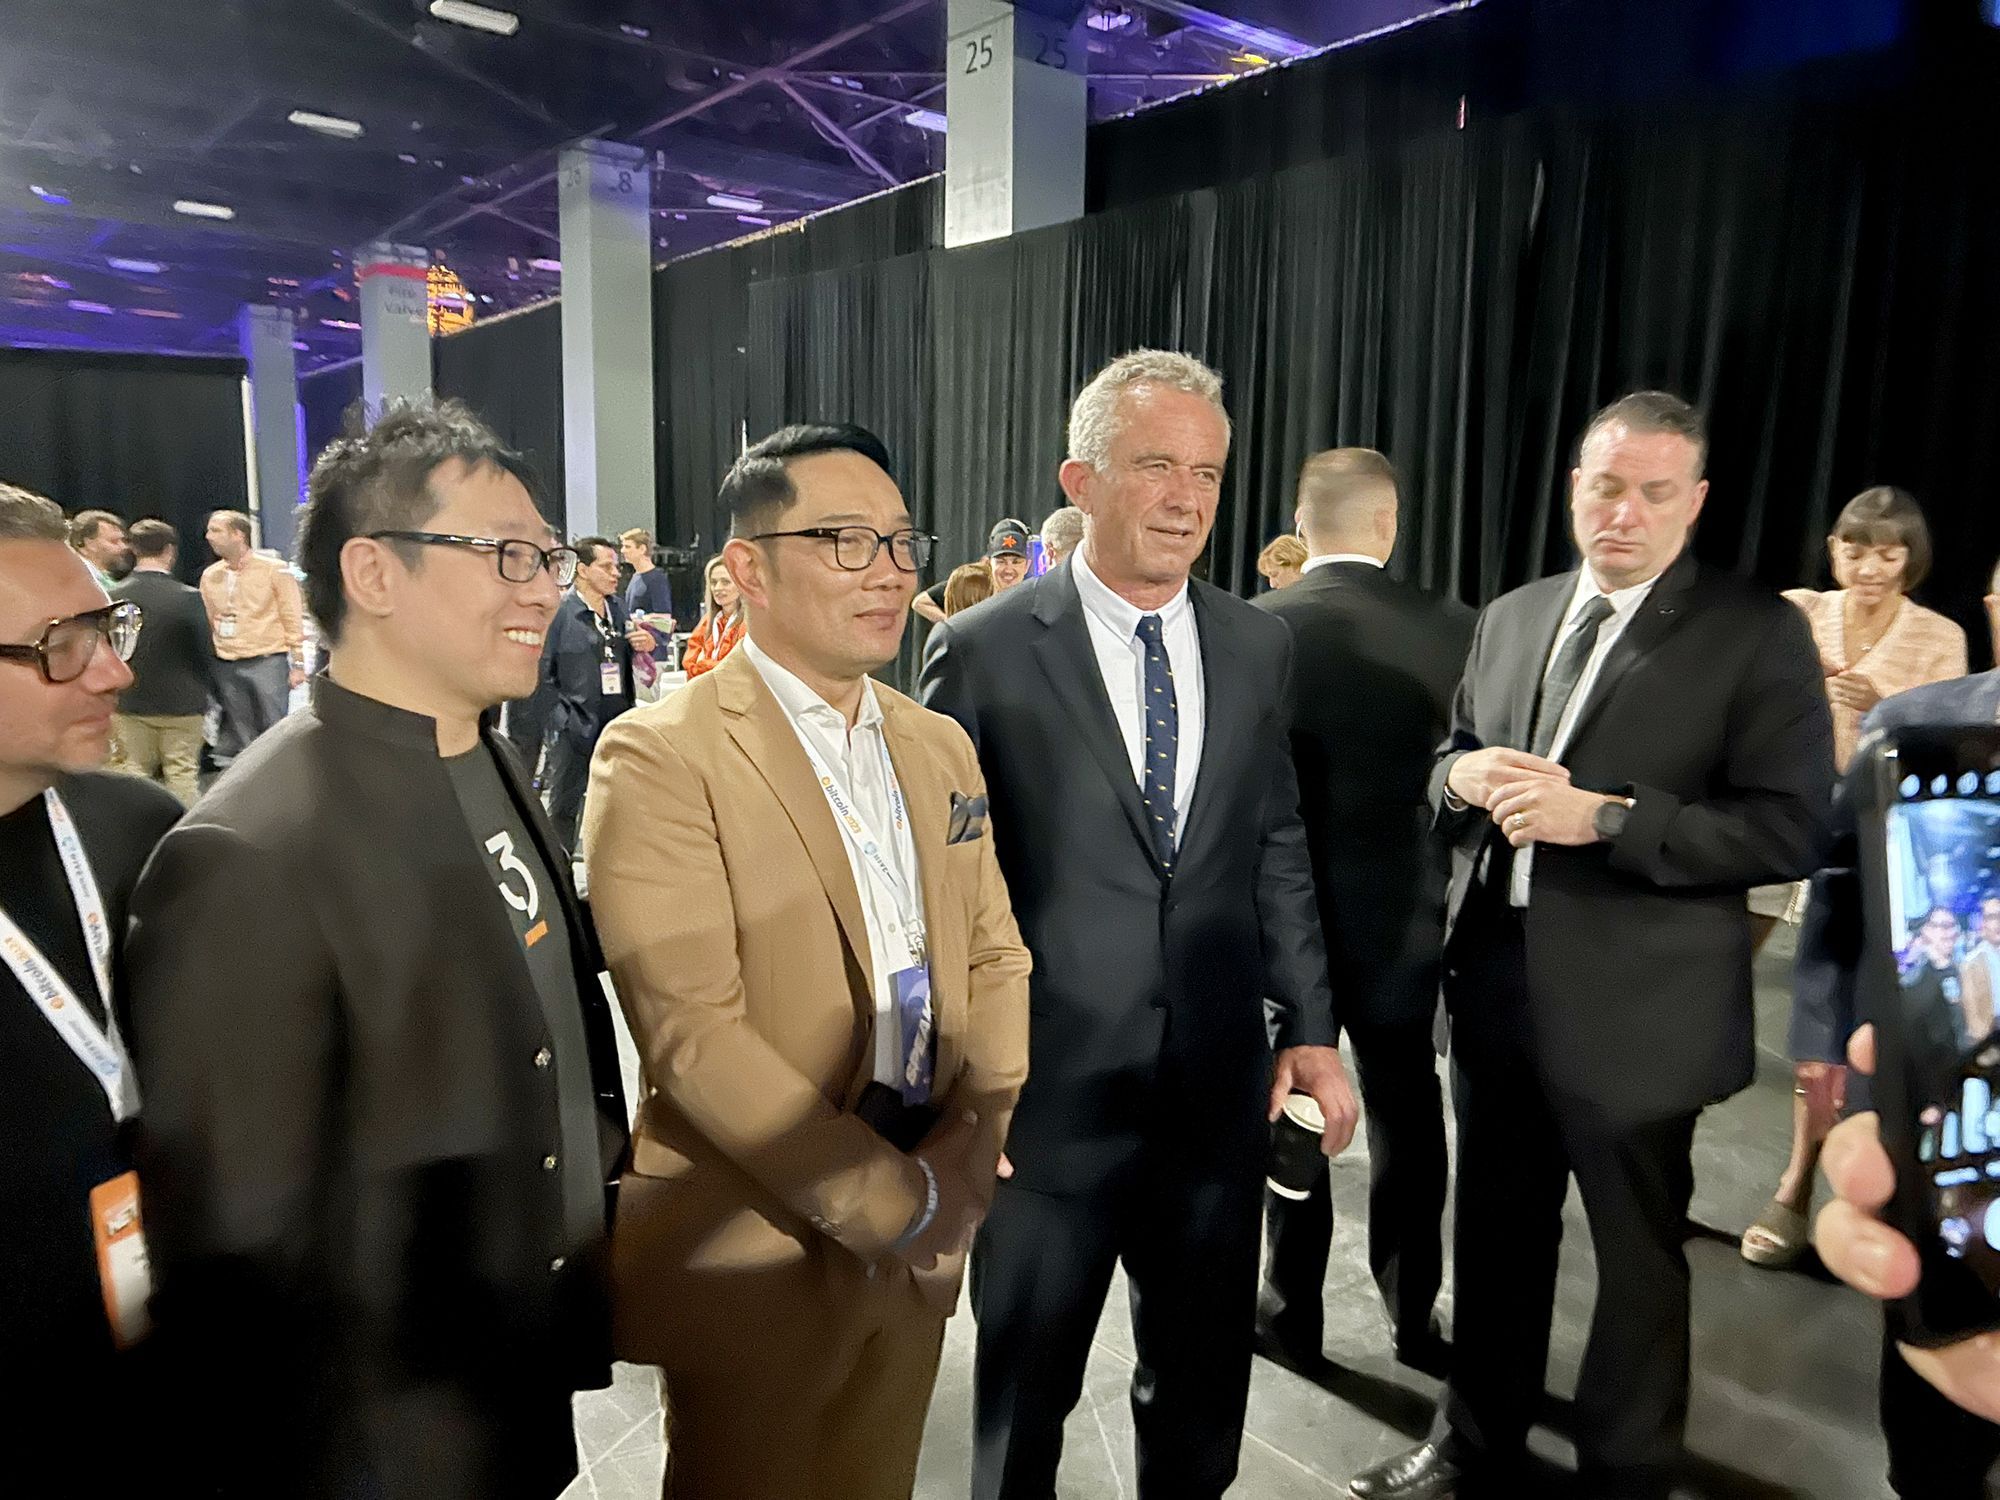 Samson Mow, Governor Ridwan Kamil, and Robert F. Kennedy Jr. pose for a photo